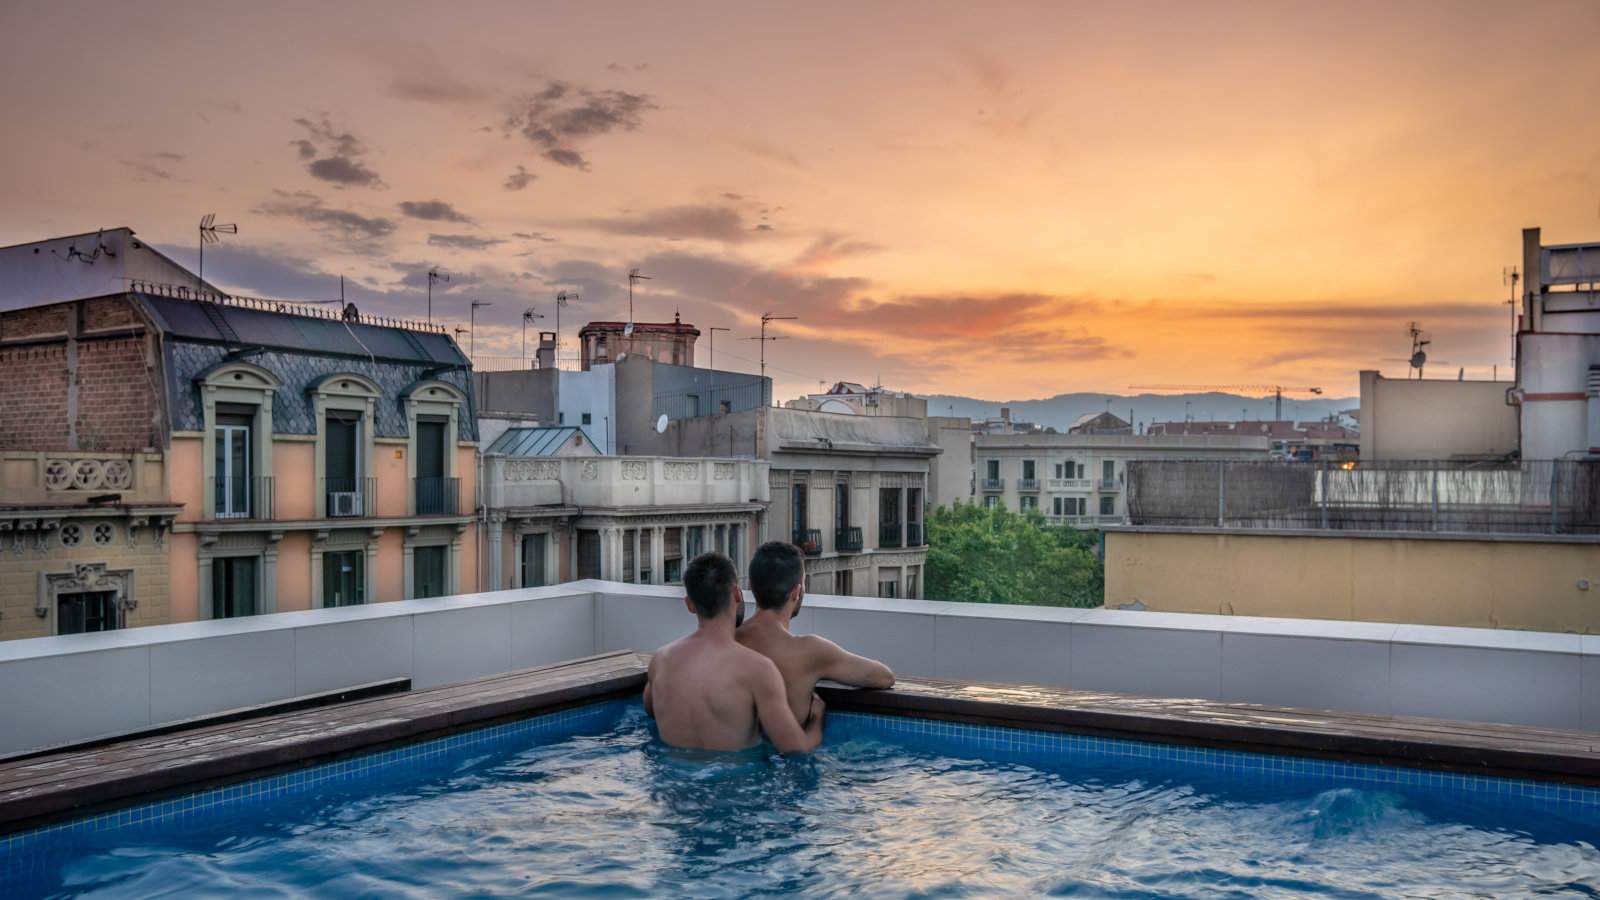 Axel's second hotel, TWO Hotel, is another very romantic gay hotel with a romantic rooftop pool and bar.